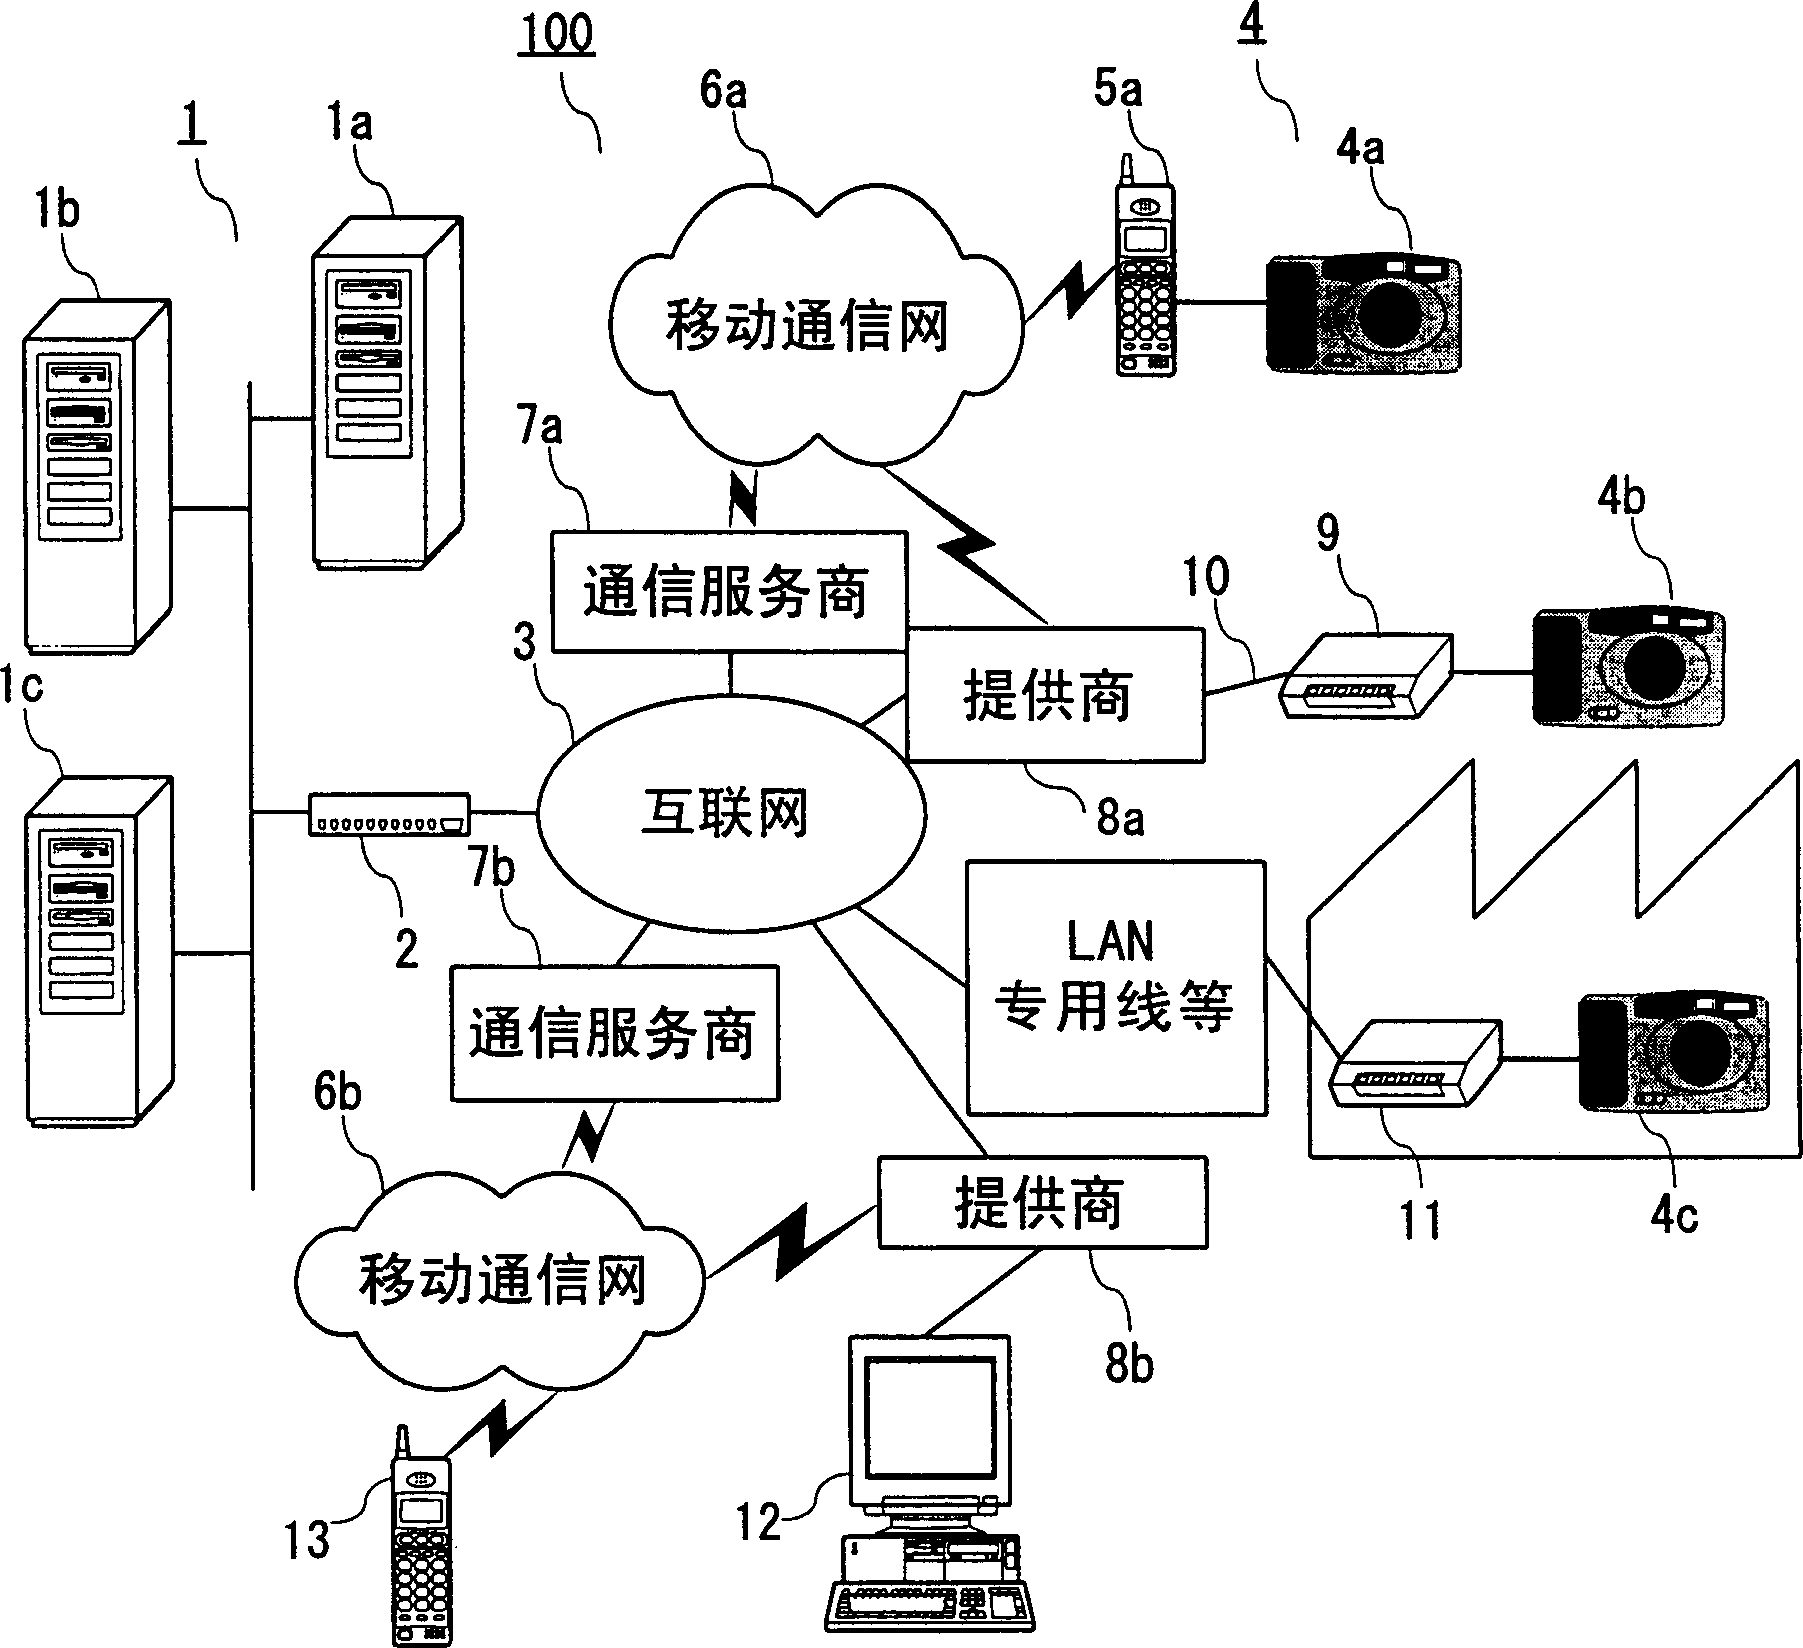 Image storage server, image storage system and remote monitor system